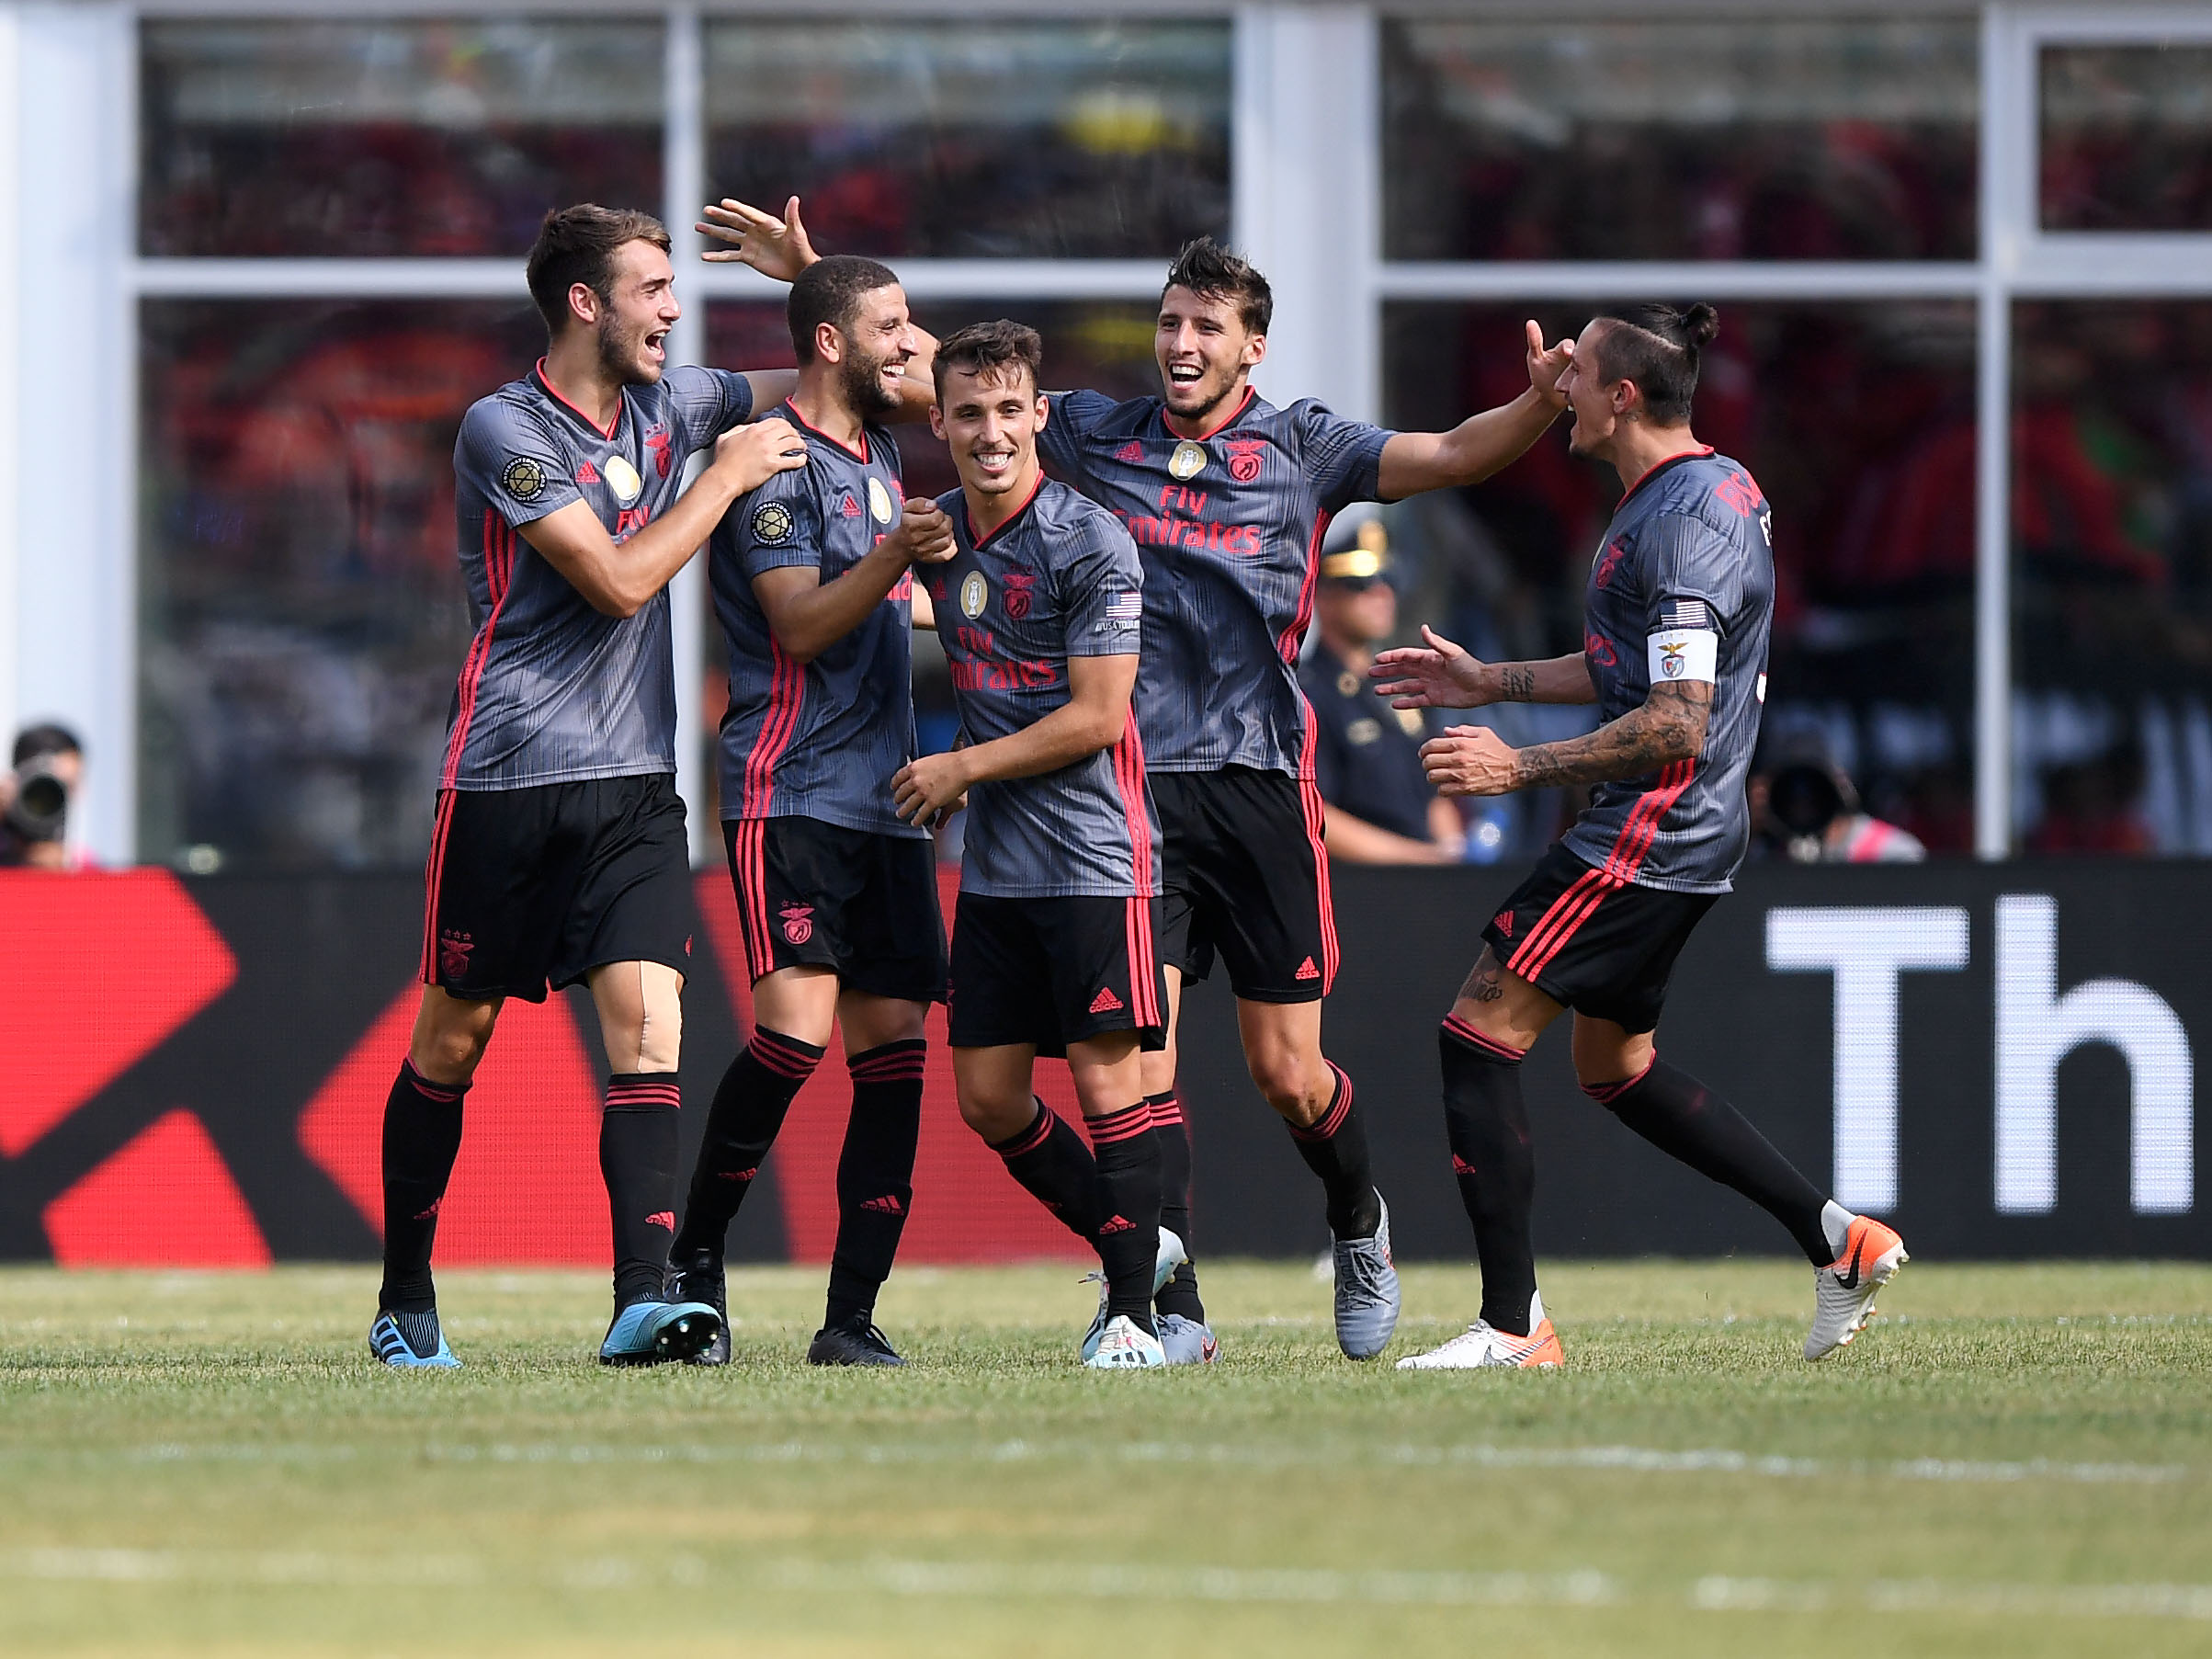 Soccer: International Champions Cup-AC Milan at Benfica